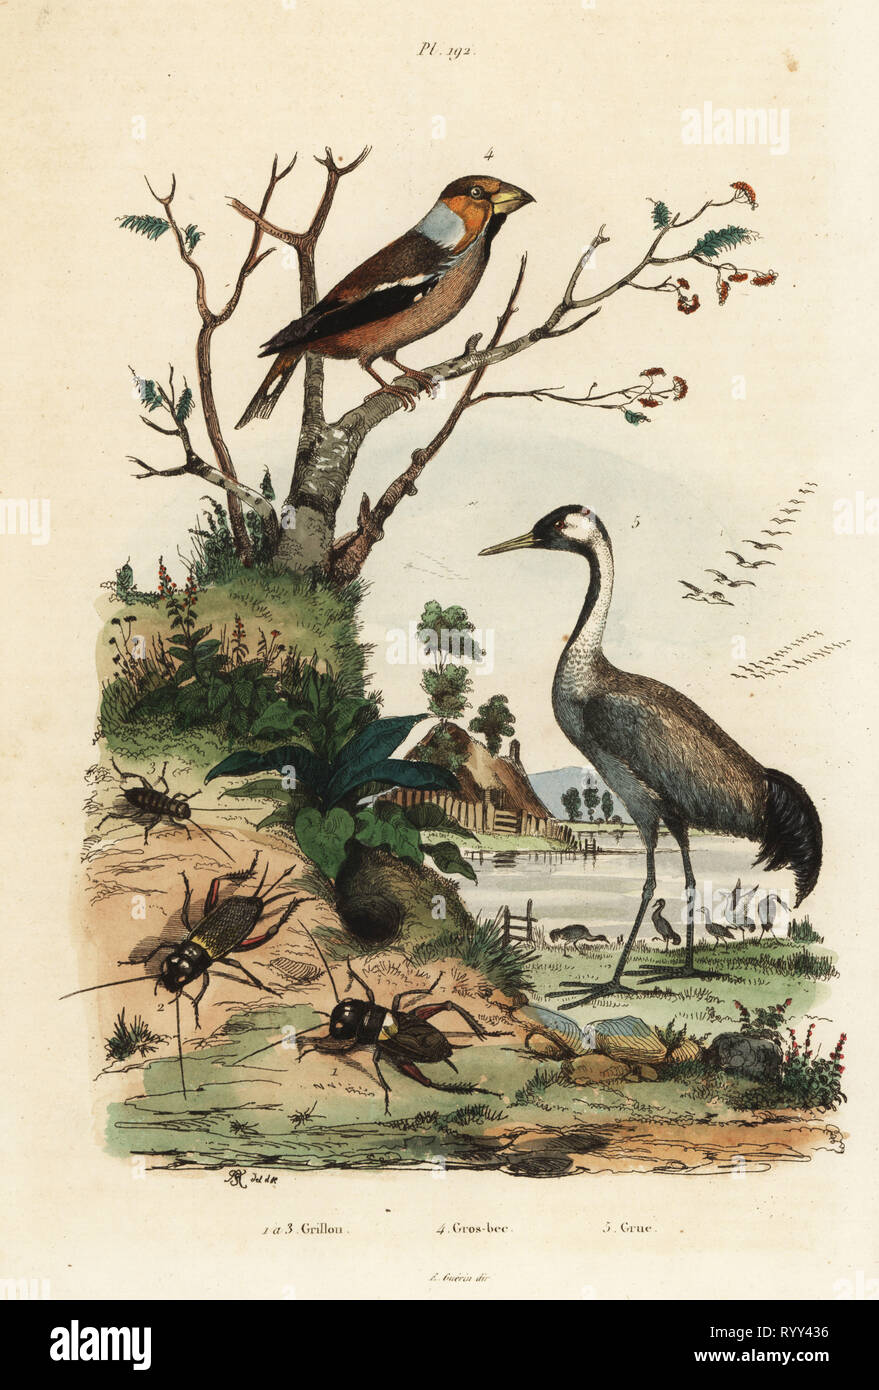 Hawfinch, Coccothraustes coccothraustes 2, common crane, Grus grus 3, and crickets, Gryllus campestris 1. Grillon, gros-bec, grue. Handcoloured steel engraving engraved and drawn by Adolph Fries from Felix-Edouard Guerin-Meneville's Dictionnaire Pittoresque d'Histoire Naturelle (Picturesque Dictionary of Natural History), Paris, 1834-39. Stock Photo